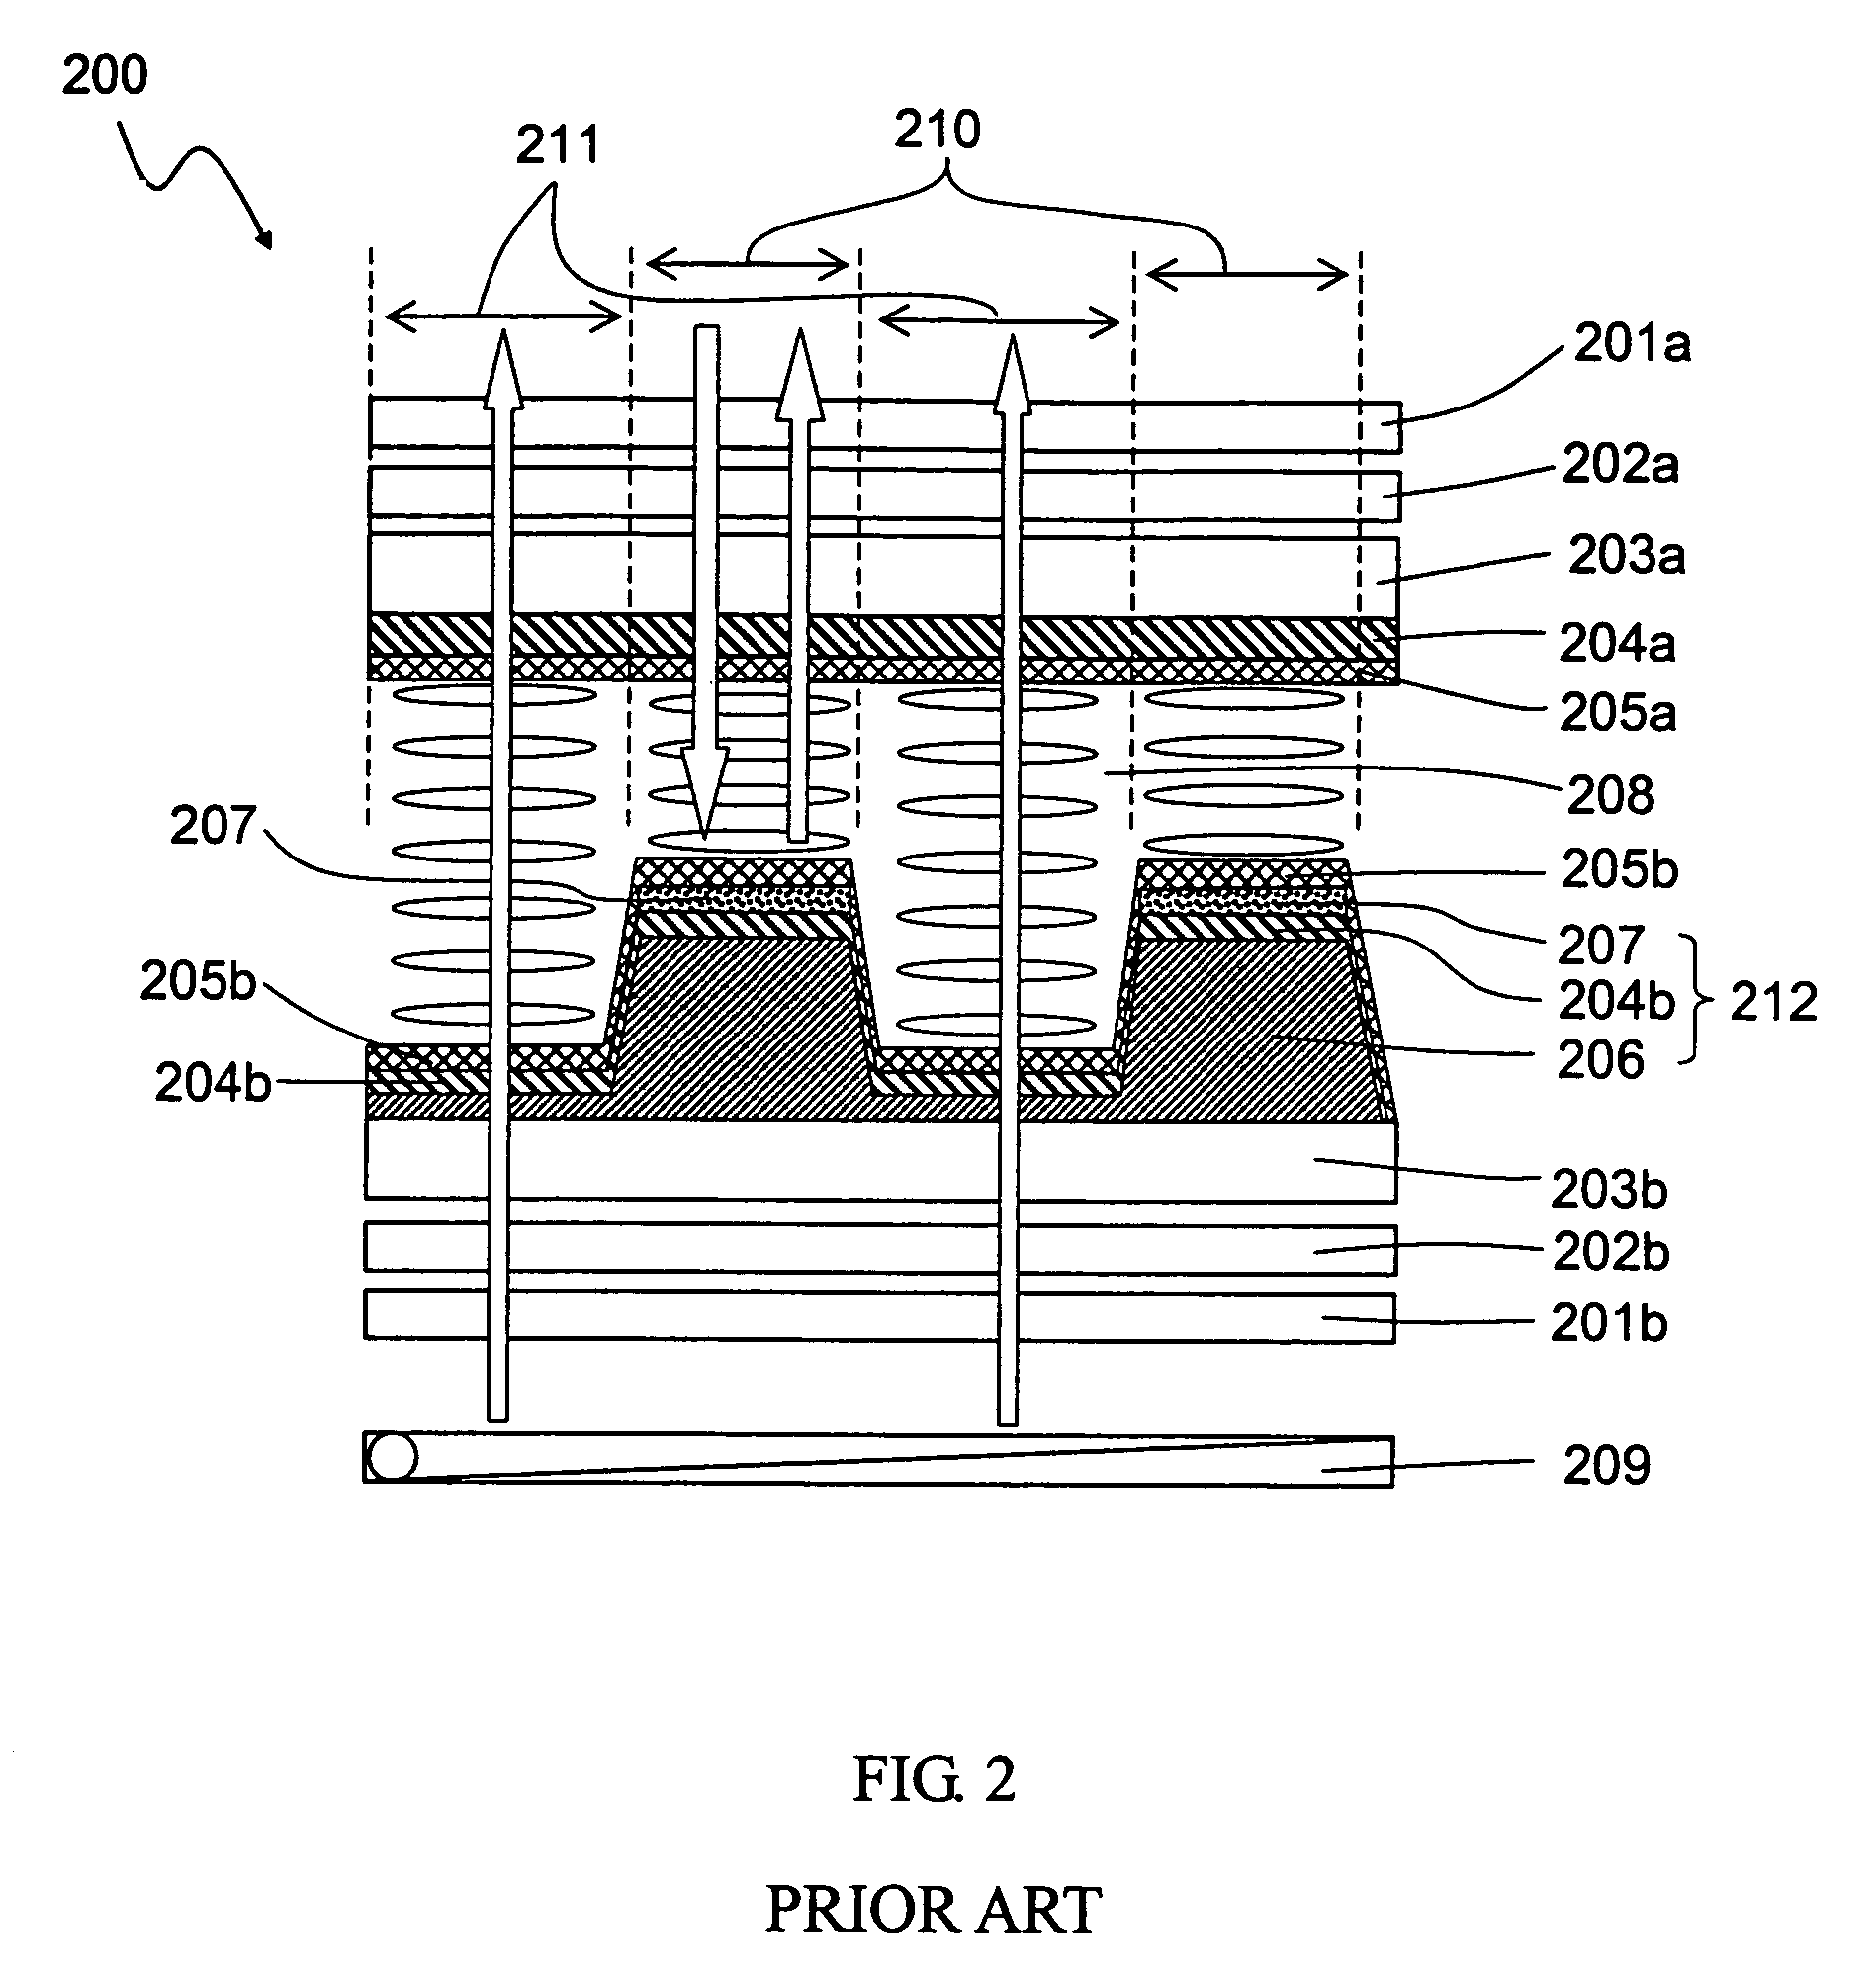 Transflective liquid crystal display with fringing and longitudinal electric field